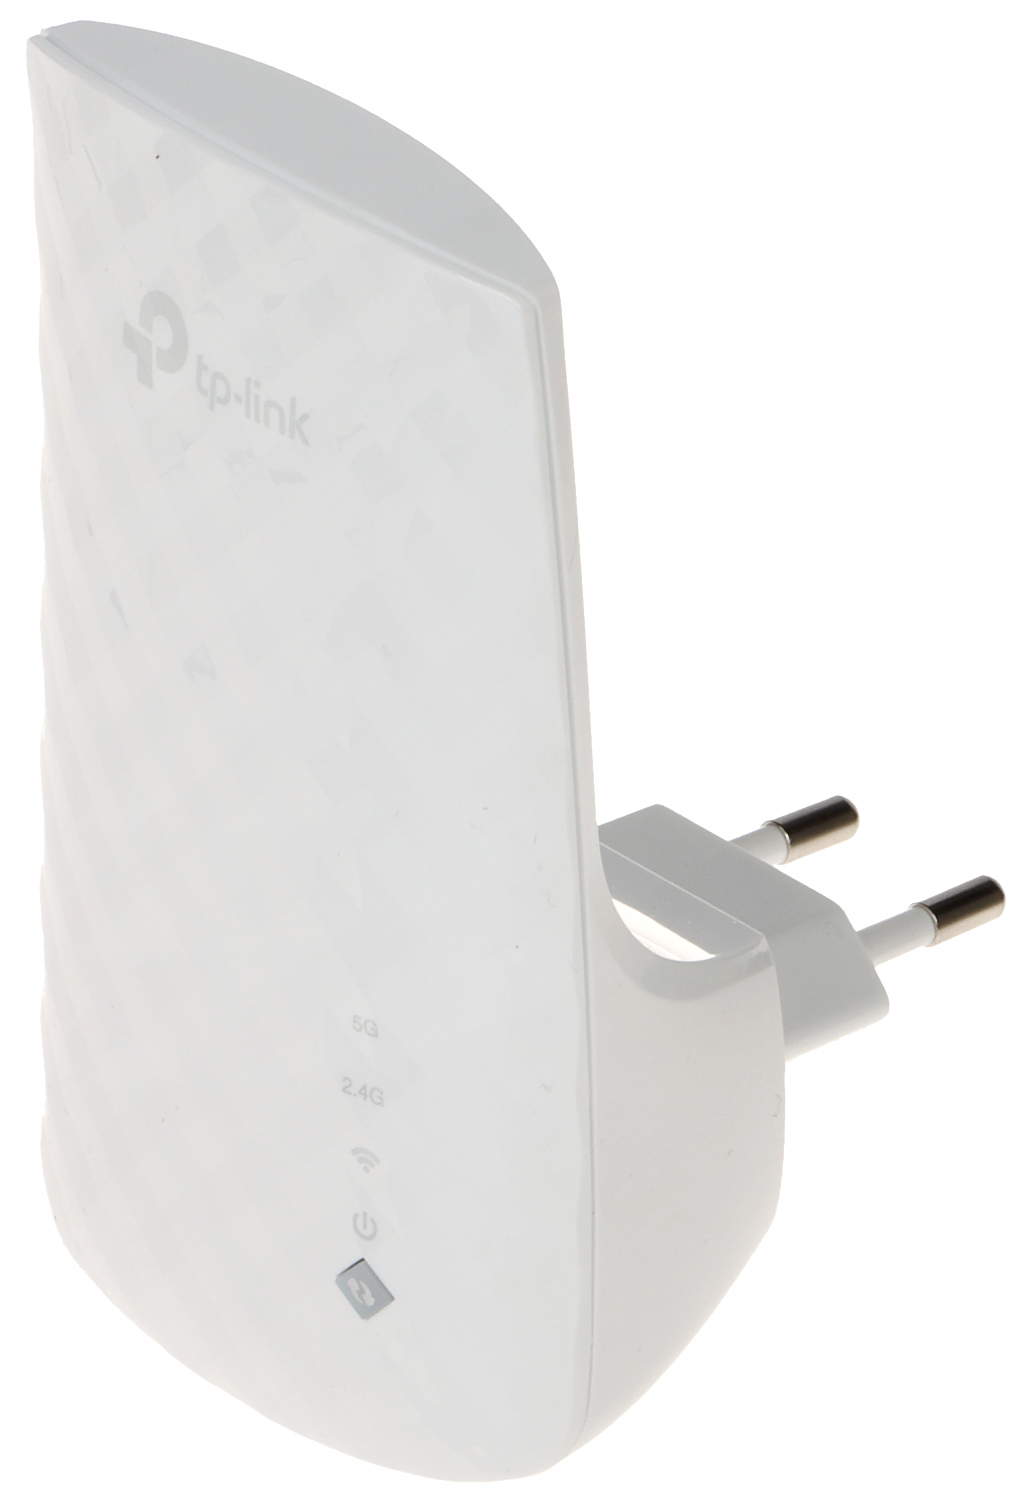 UNIVERSAL WI-FI RANGE EXTENDER TL-RE190 2.4 GHz, 5 GHz... - Other Devices -  Delta